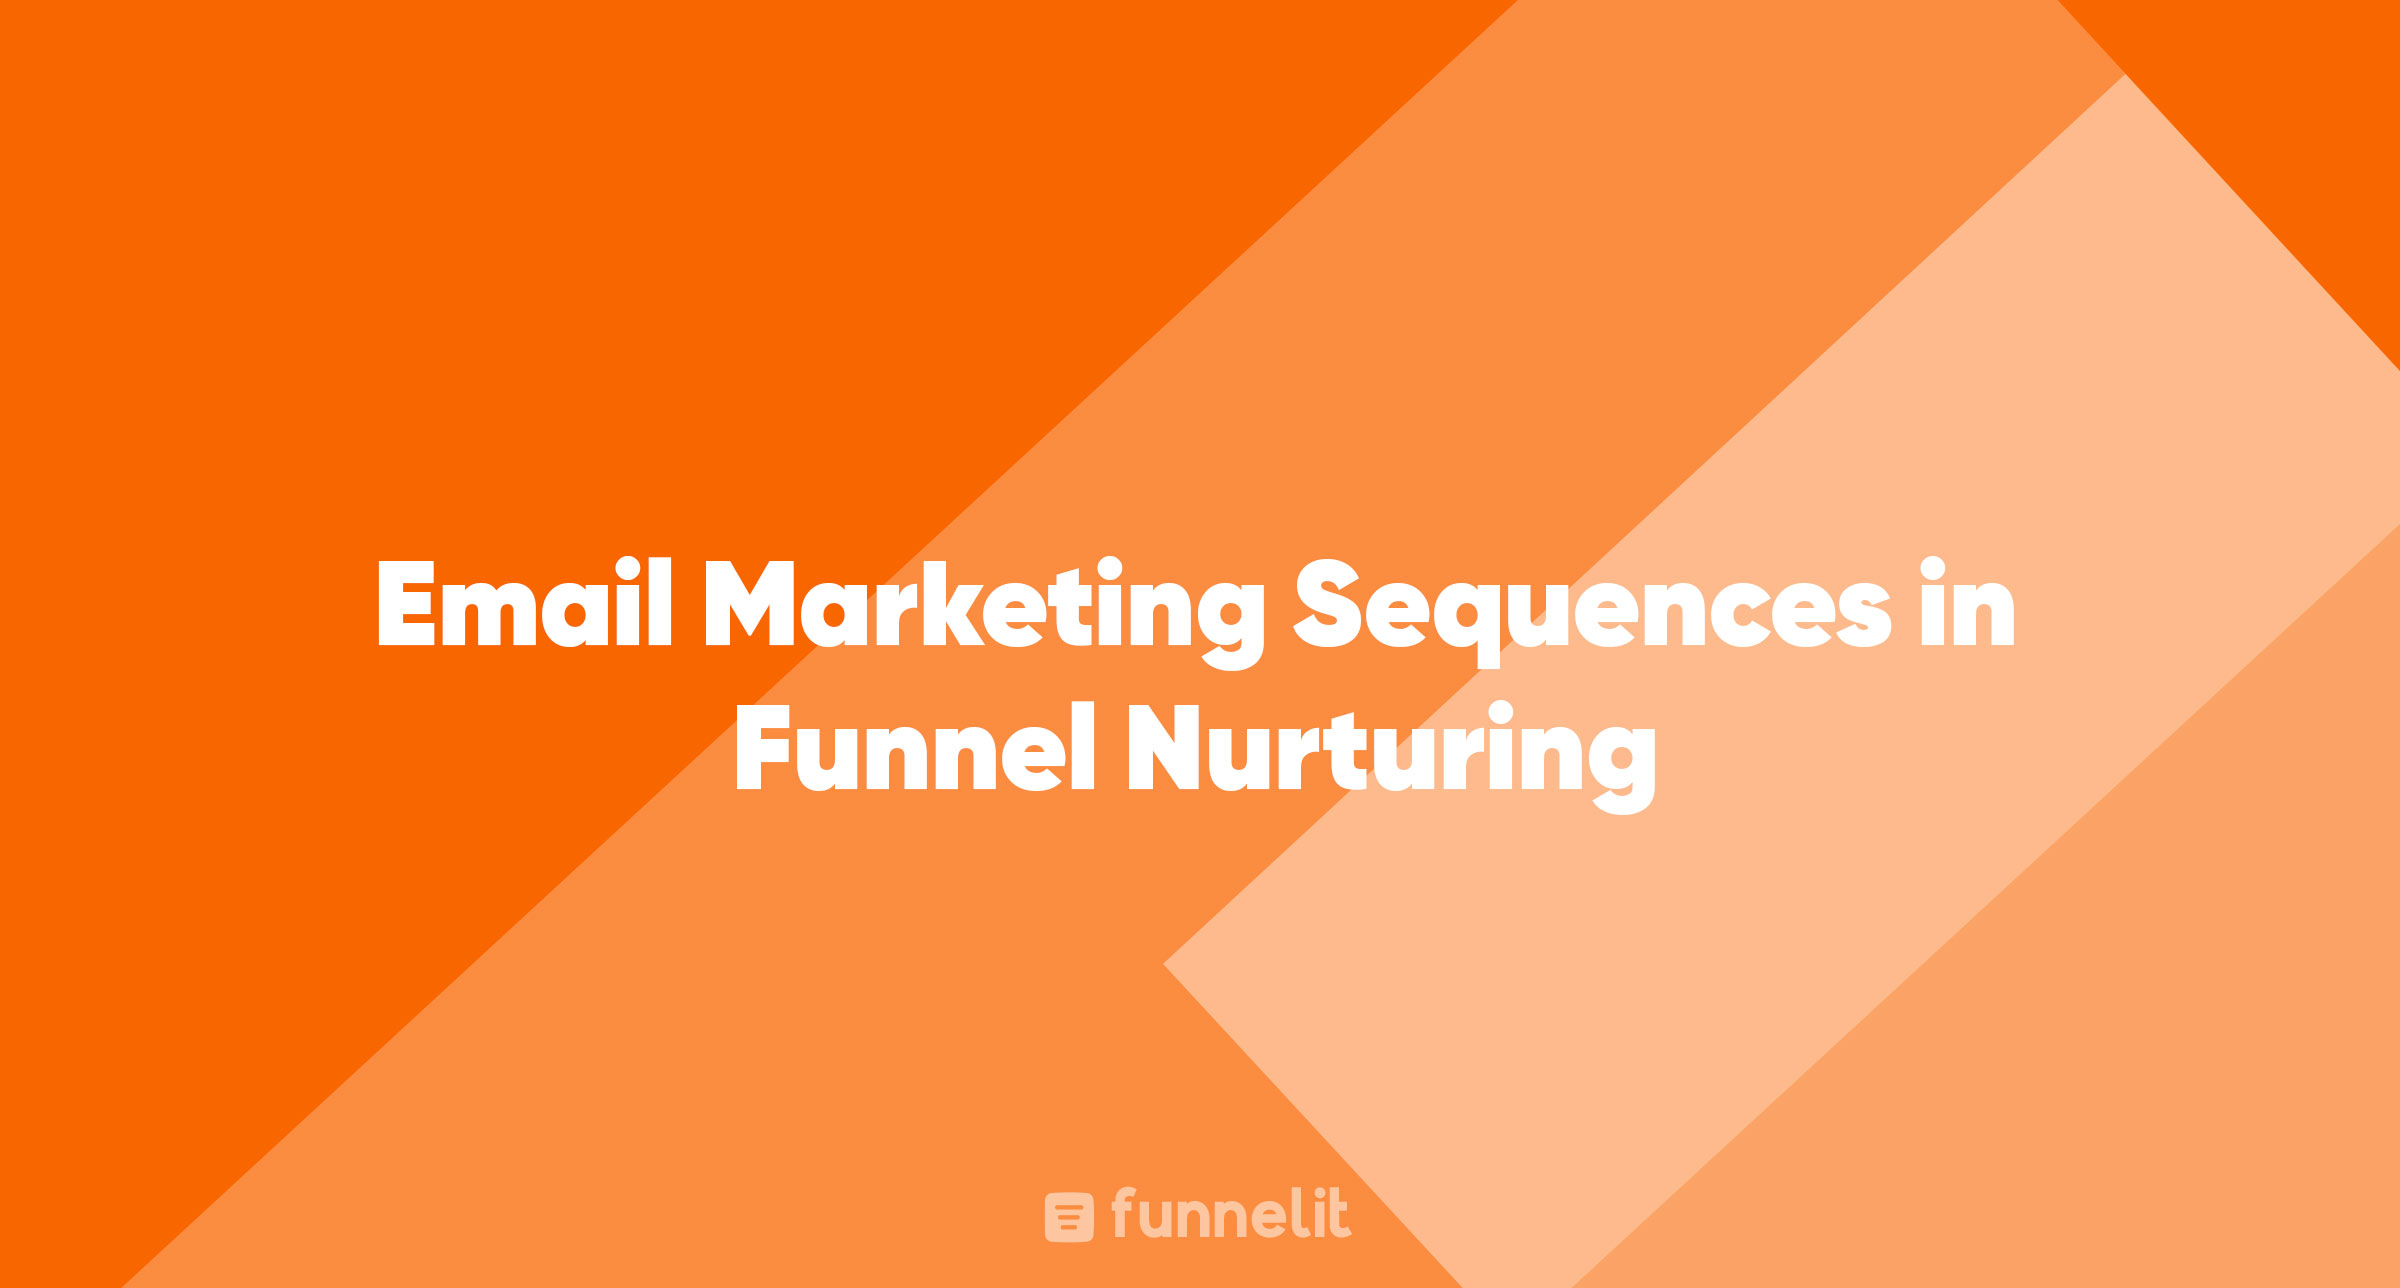 Article | Email Marketing Sequences in Funnel Nurturing